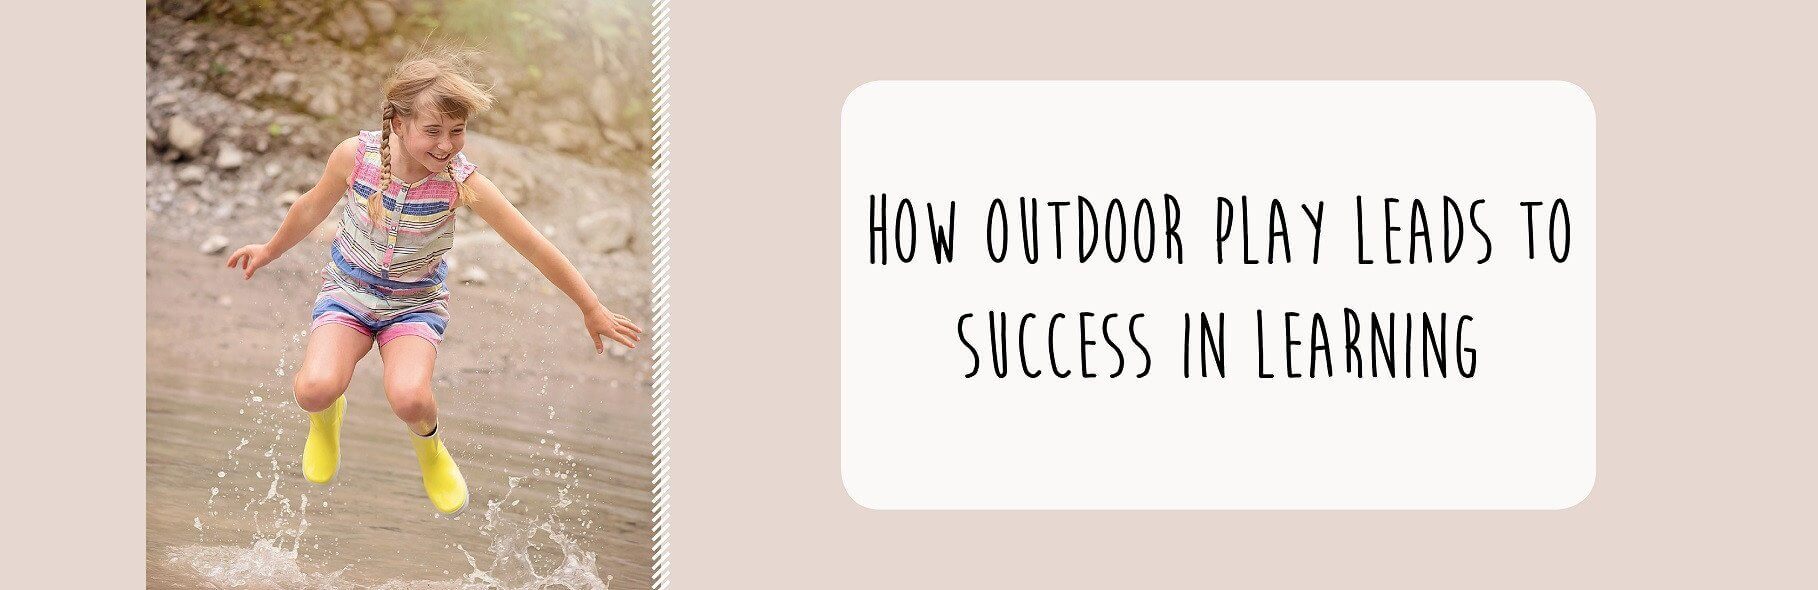 How Outdoor Play Leads to Success in Learning